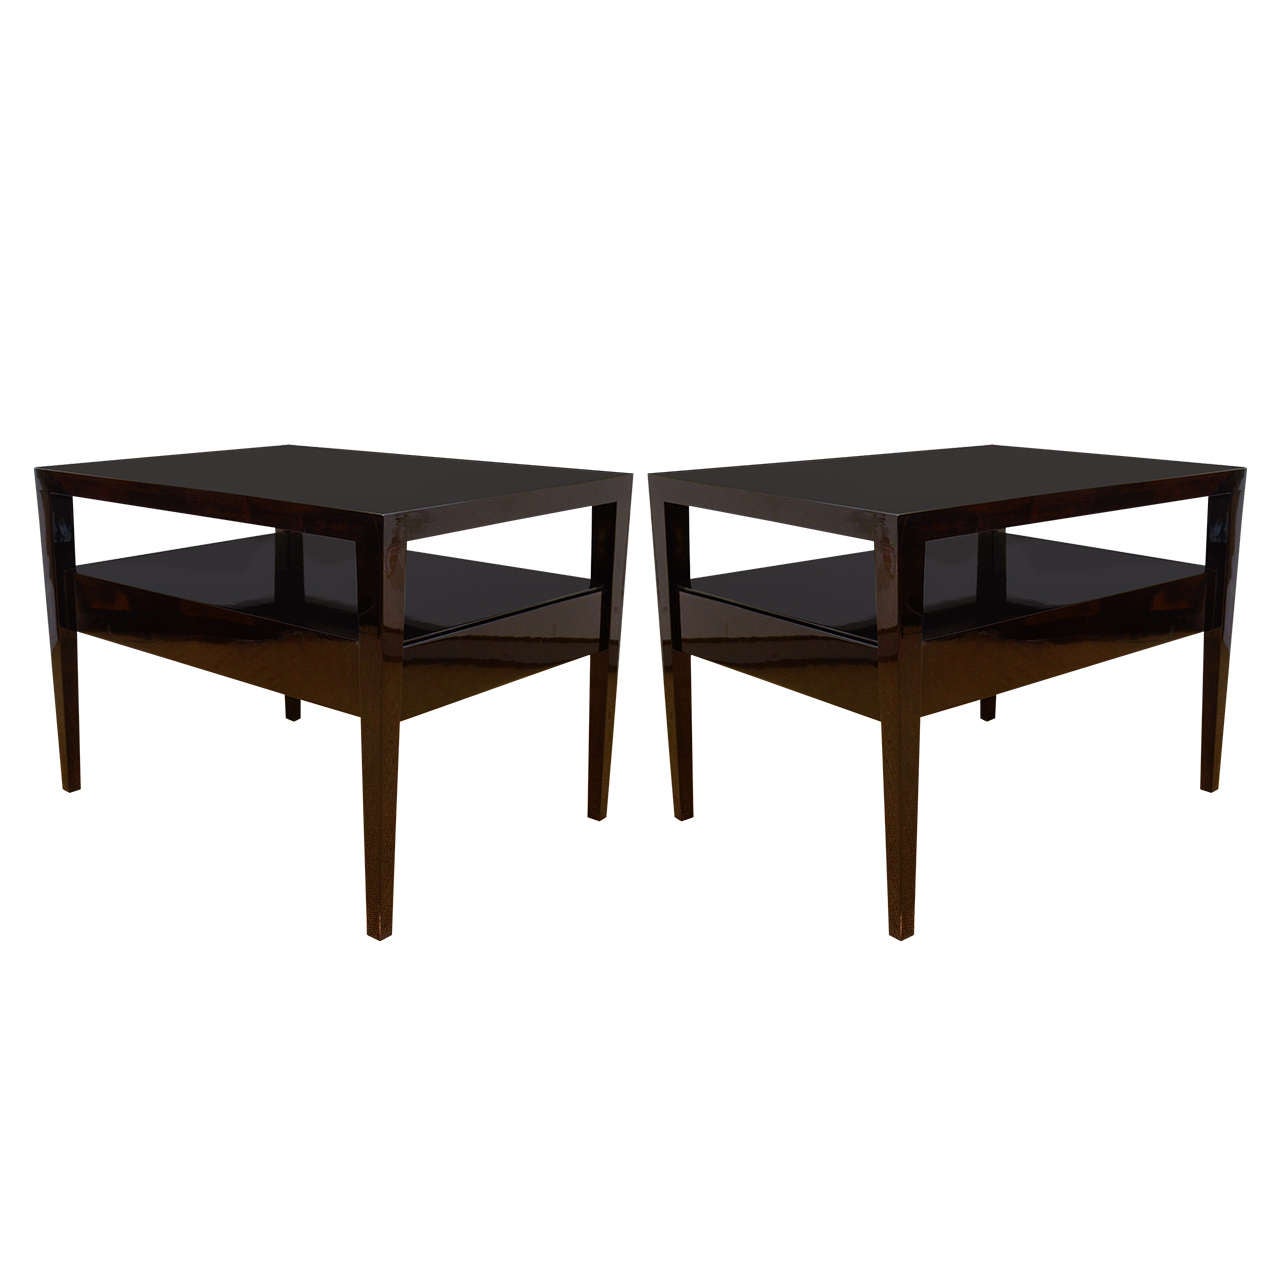 Pair of Rectangular, Custom-Made, Two-Tier End Tables with a Drawer